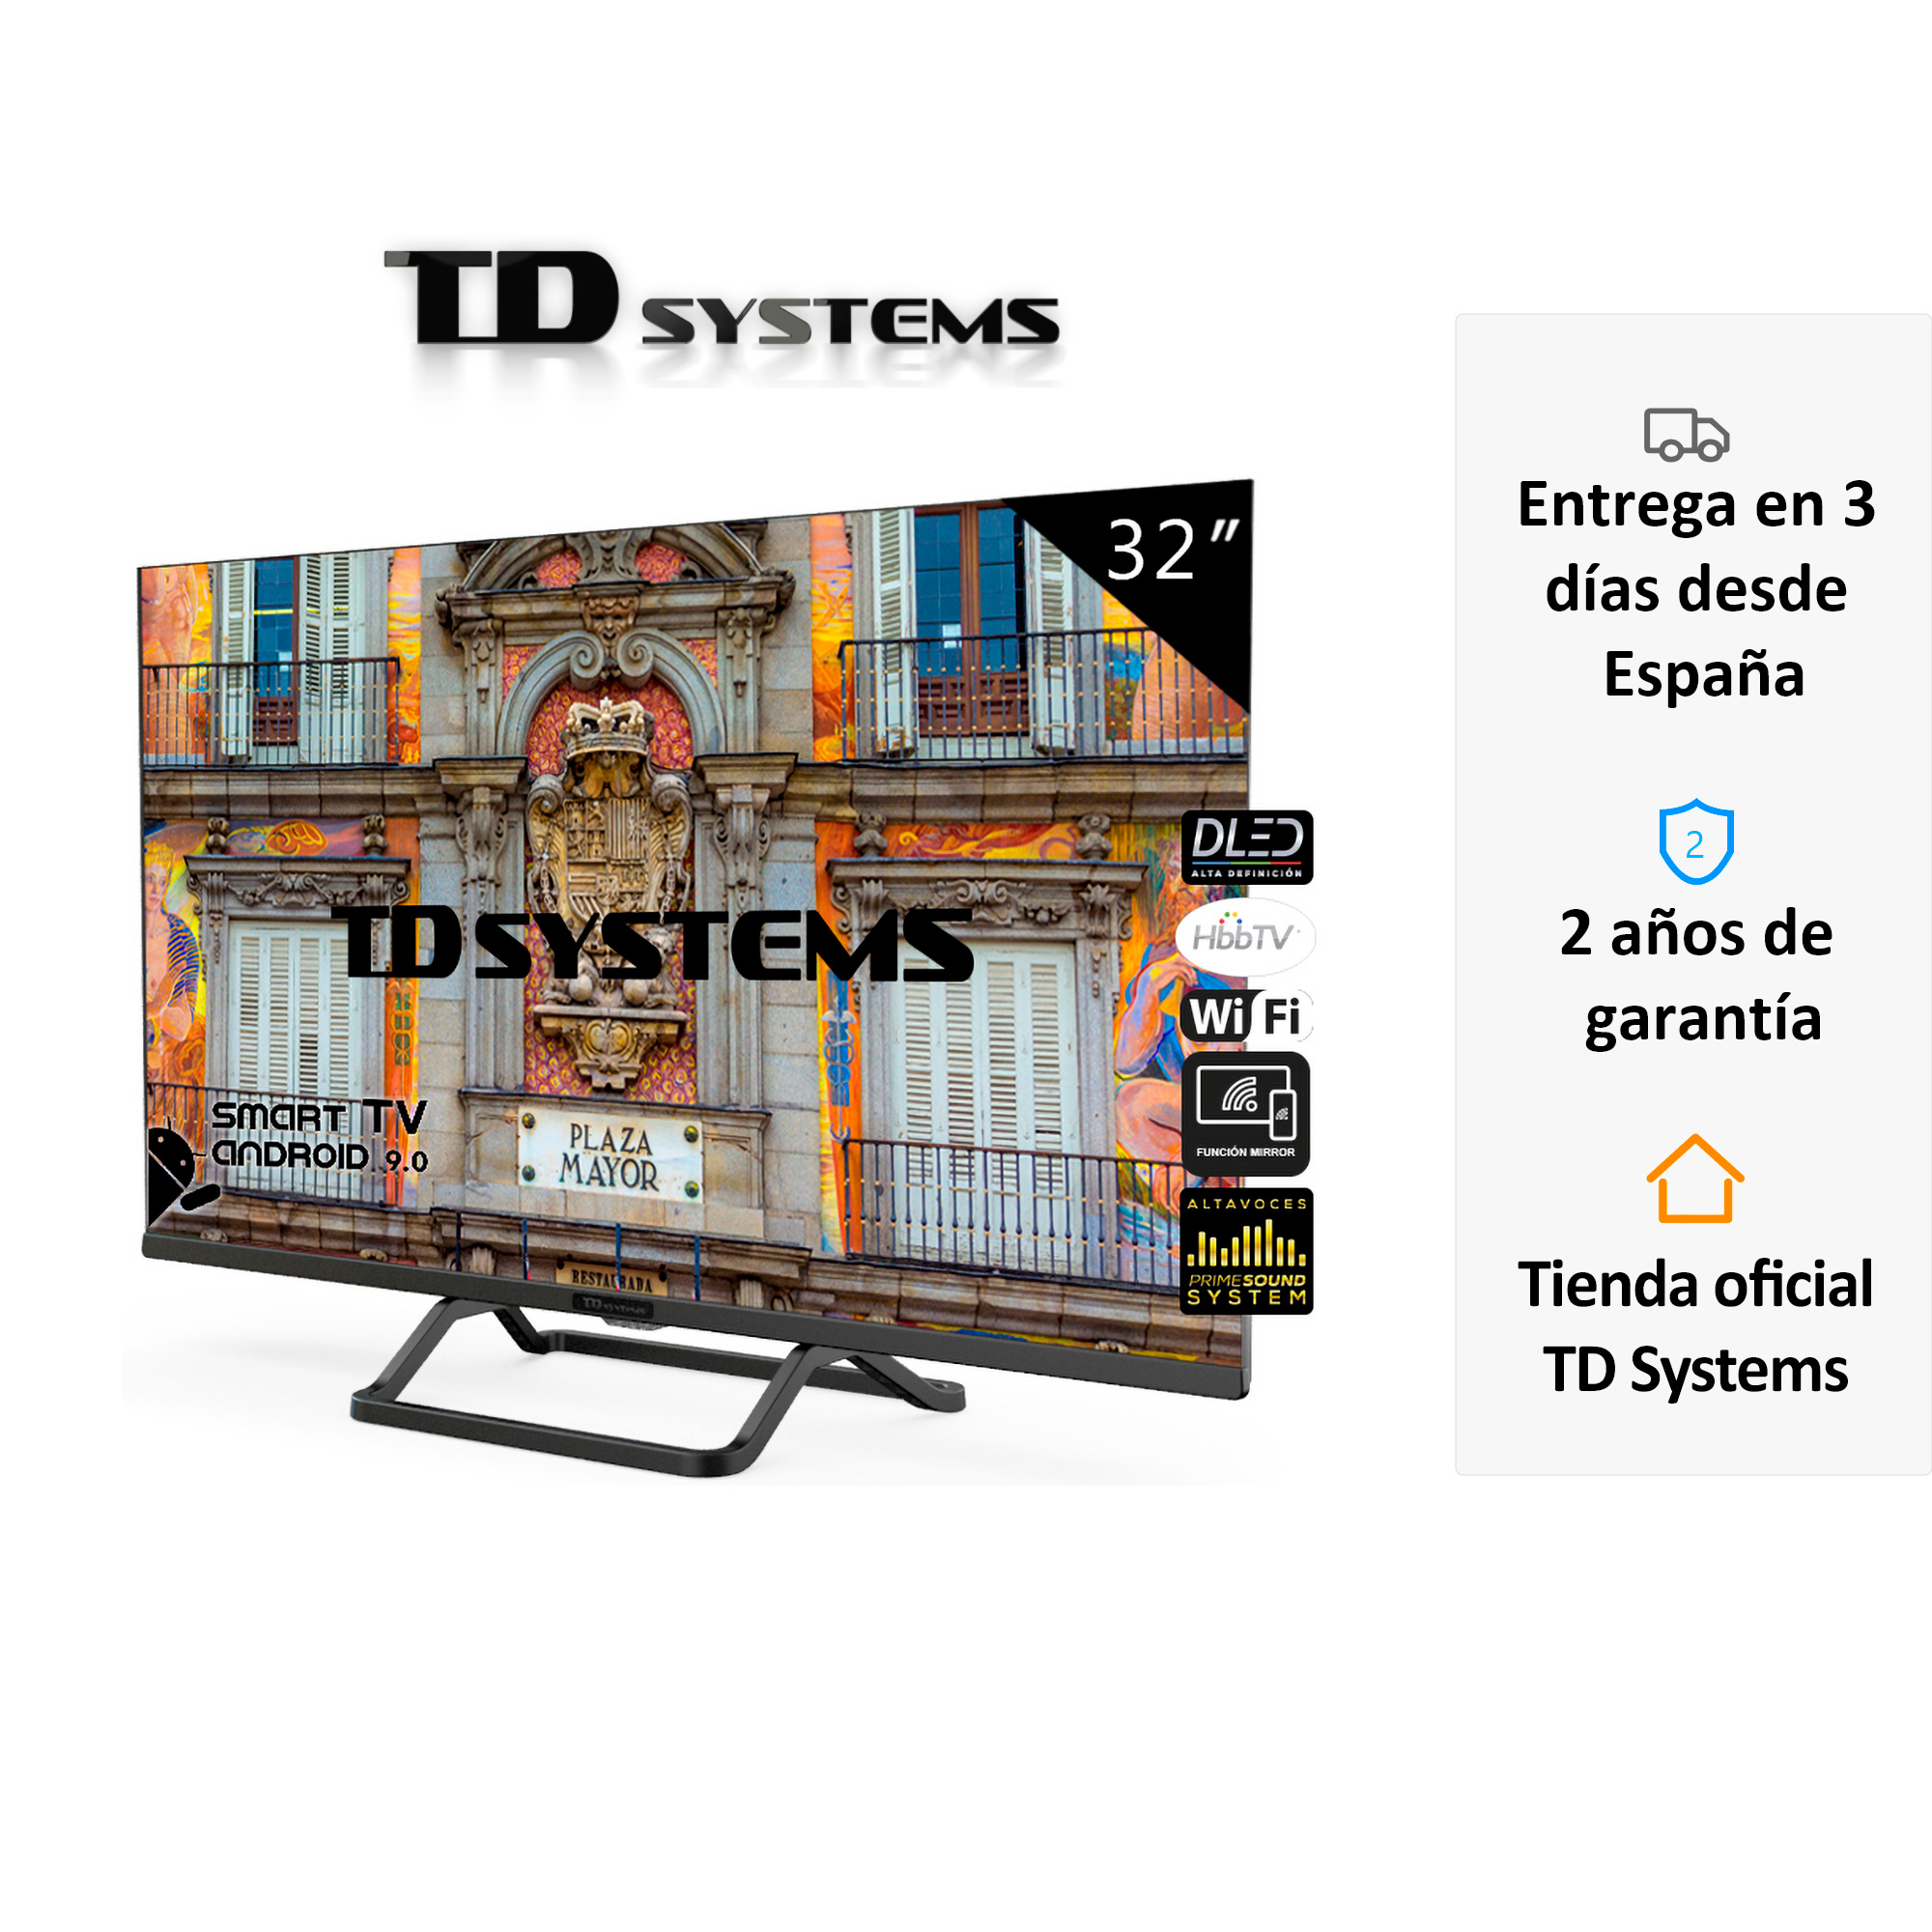 Smart TV televisions 32 inch TD Systems K32DLX10HS. 3x HDMI, DVB-T2/C/S2,  HbbTV [shipping from Spain, 2 year warranty] - Price history & Review, AliExpress Seller - TD Systems Store